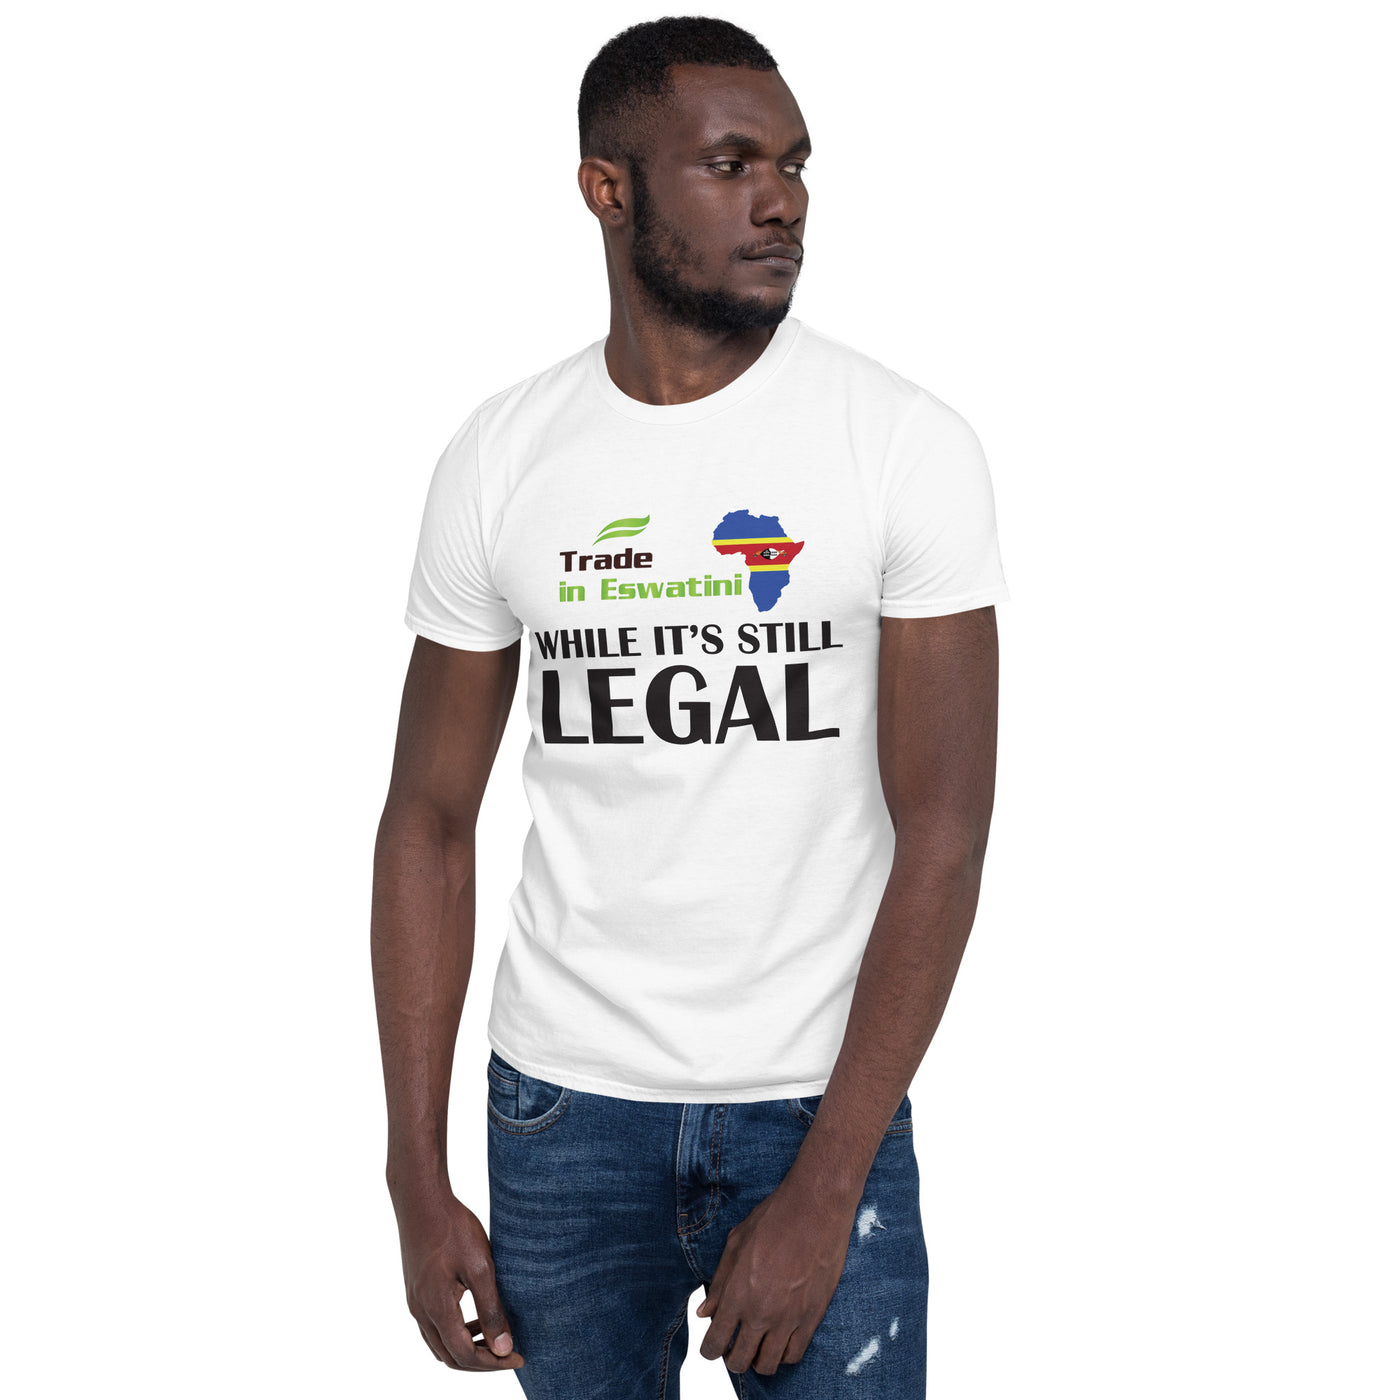 While It's Still Legal - Trade In Eswatini Short-Sleeve Unisex T-Shirt